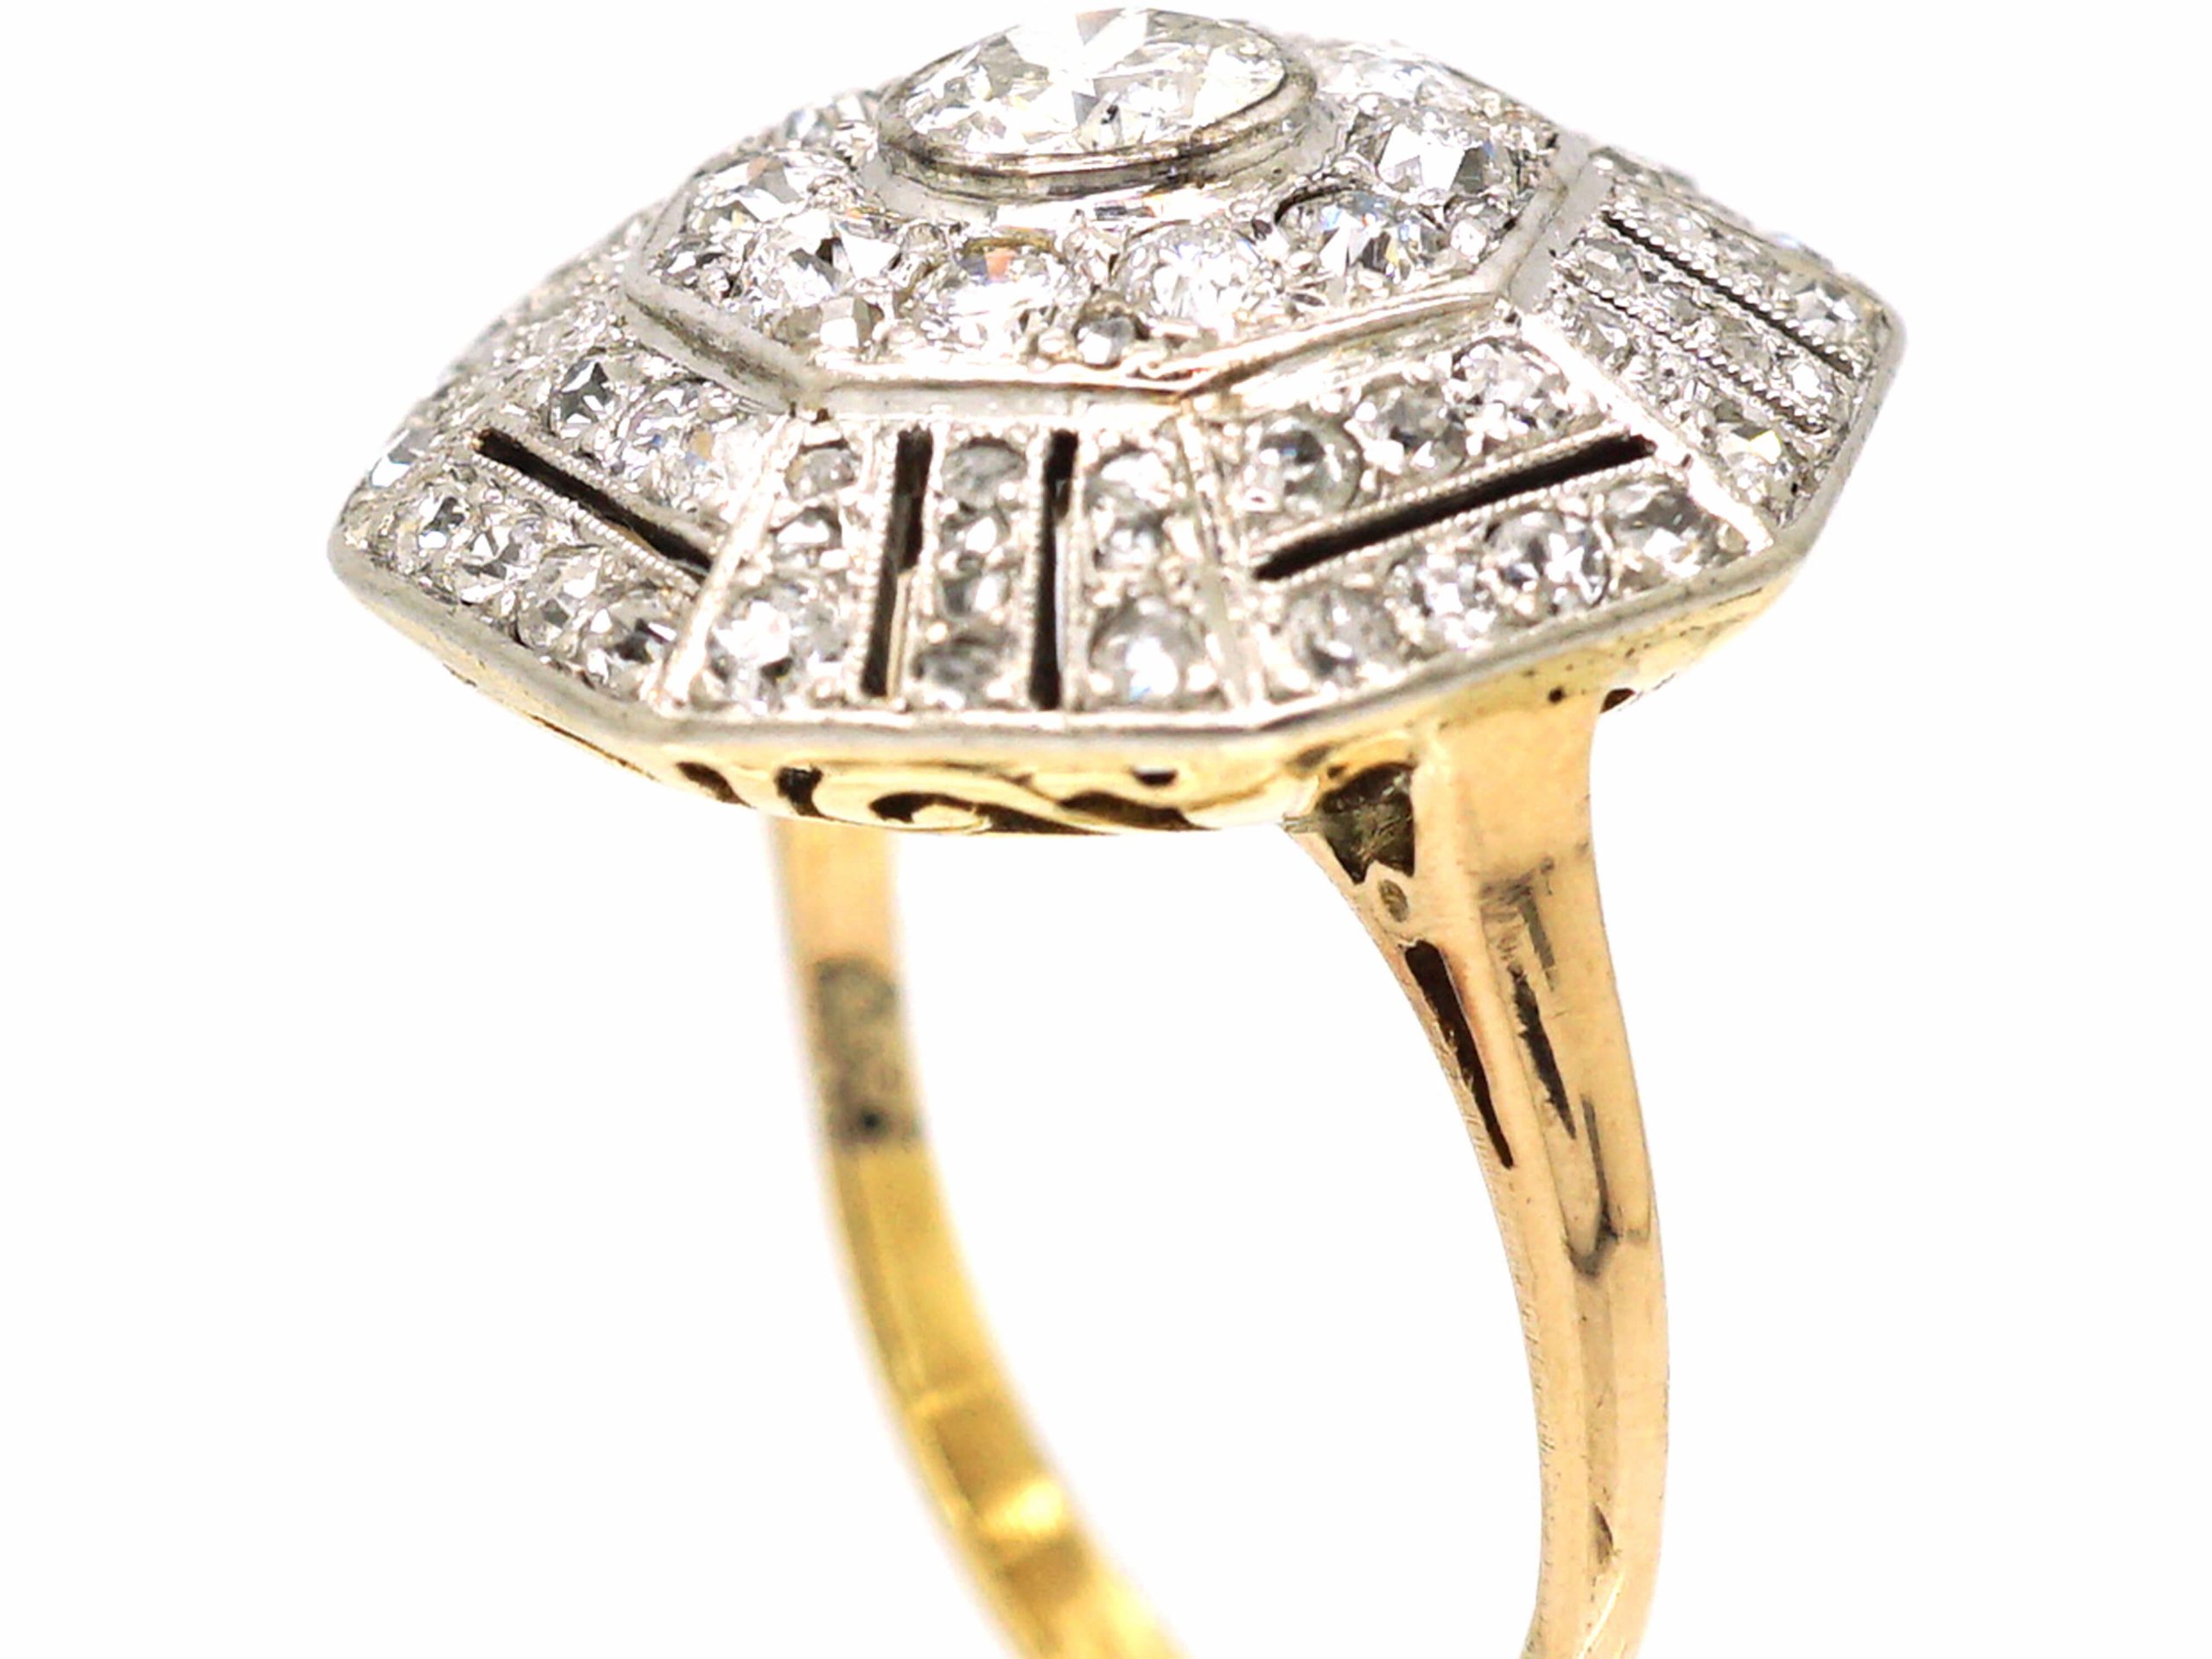 Art Deco 18ct Gold And Platinum Large Octagonal Shaped Ring Set With Diamonds 731w The Antique